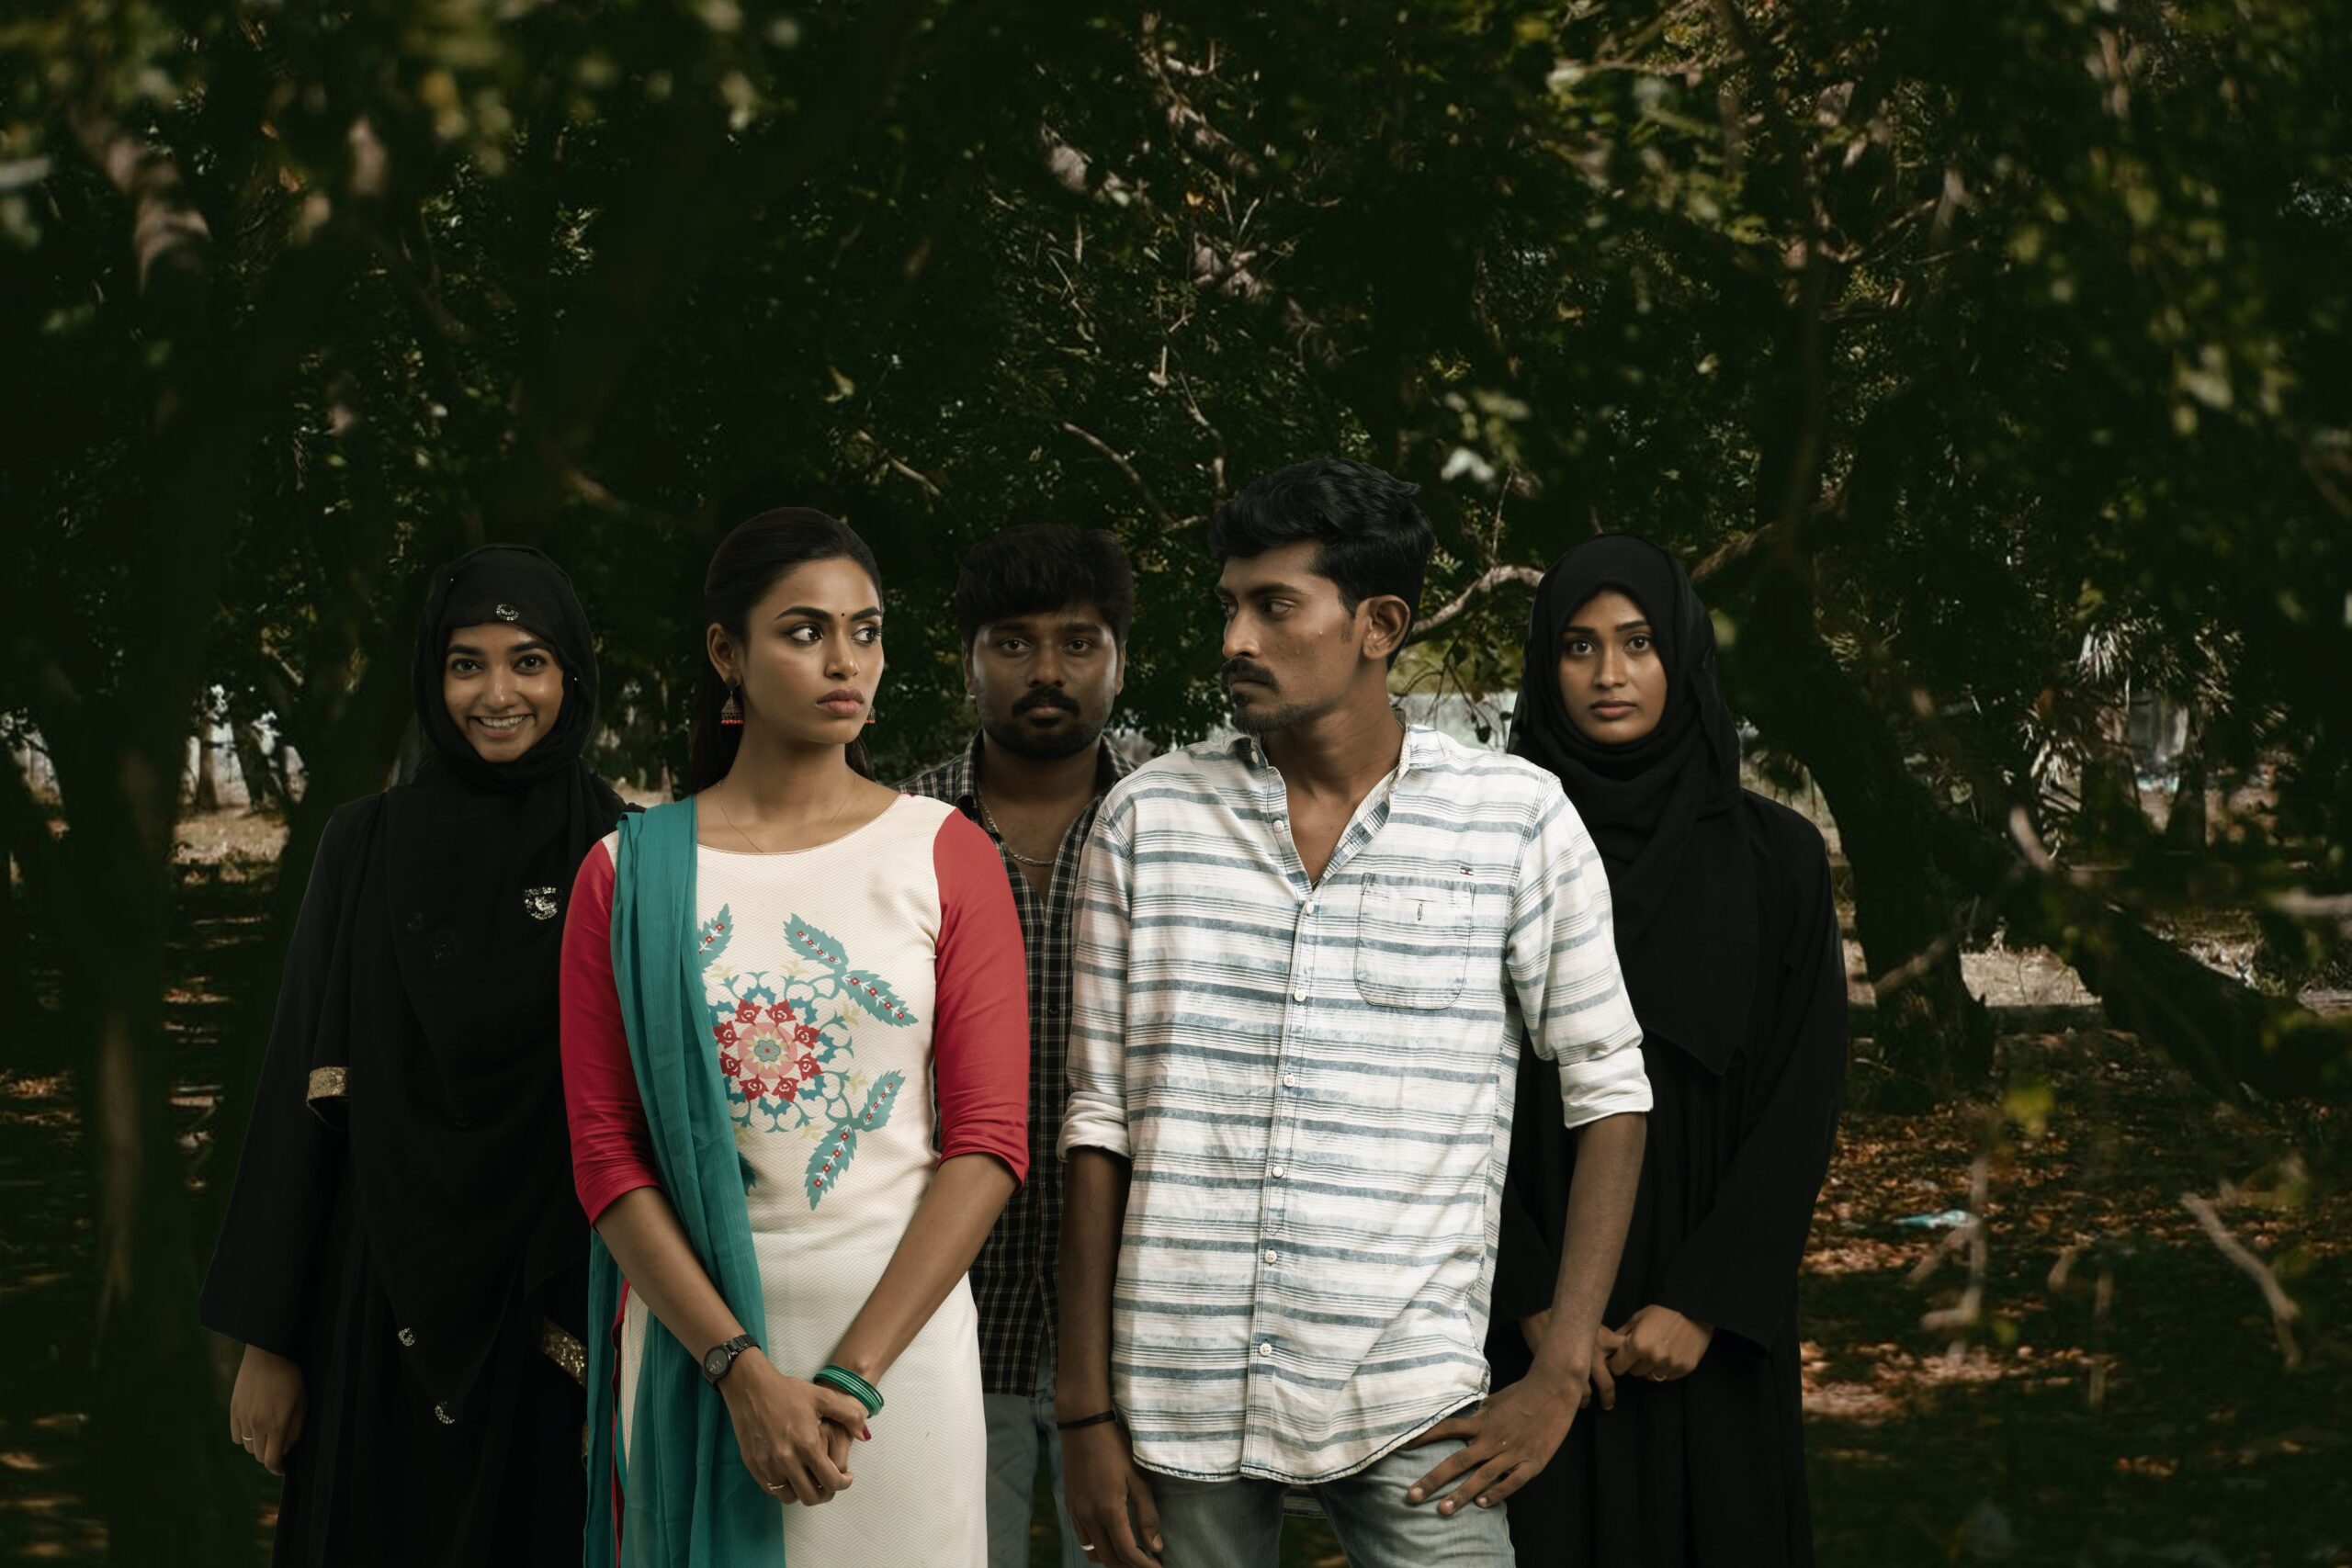 Nalla Perai Vaanga Vendum Pillaigale " - A Beautiful Coming-of-Age film that endorses the friendship, dreams, and emotions of youngsters !! - Moviewingz.com